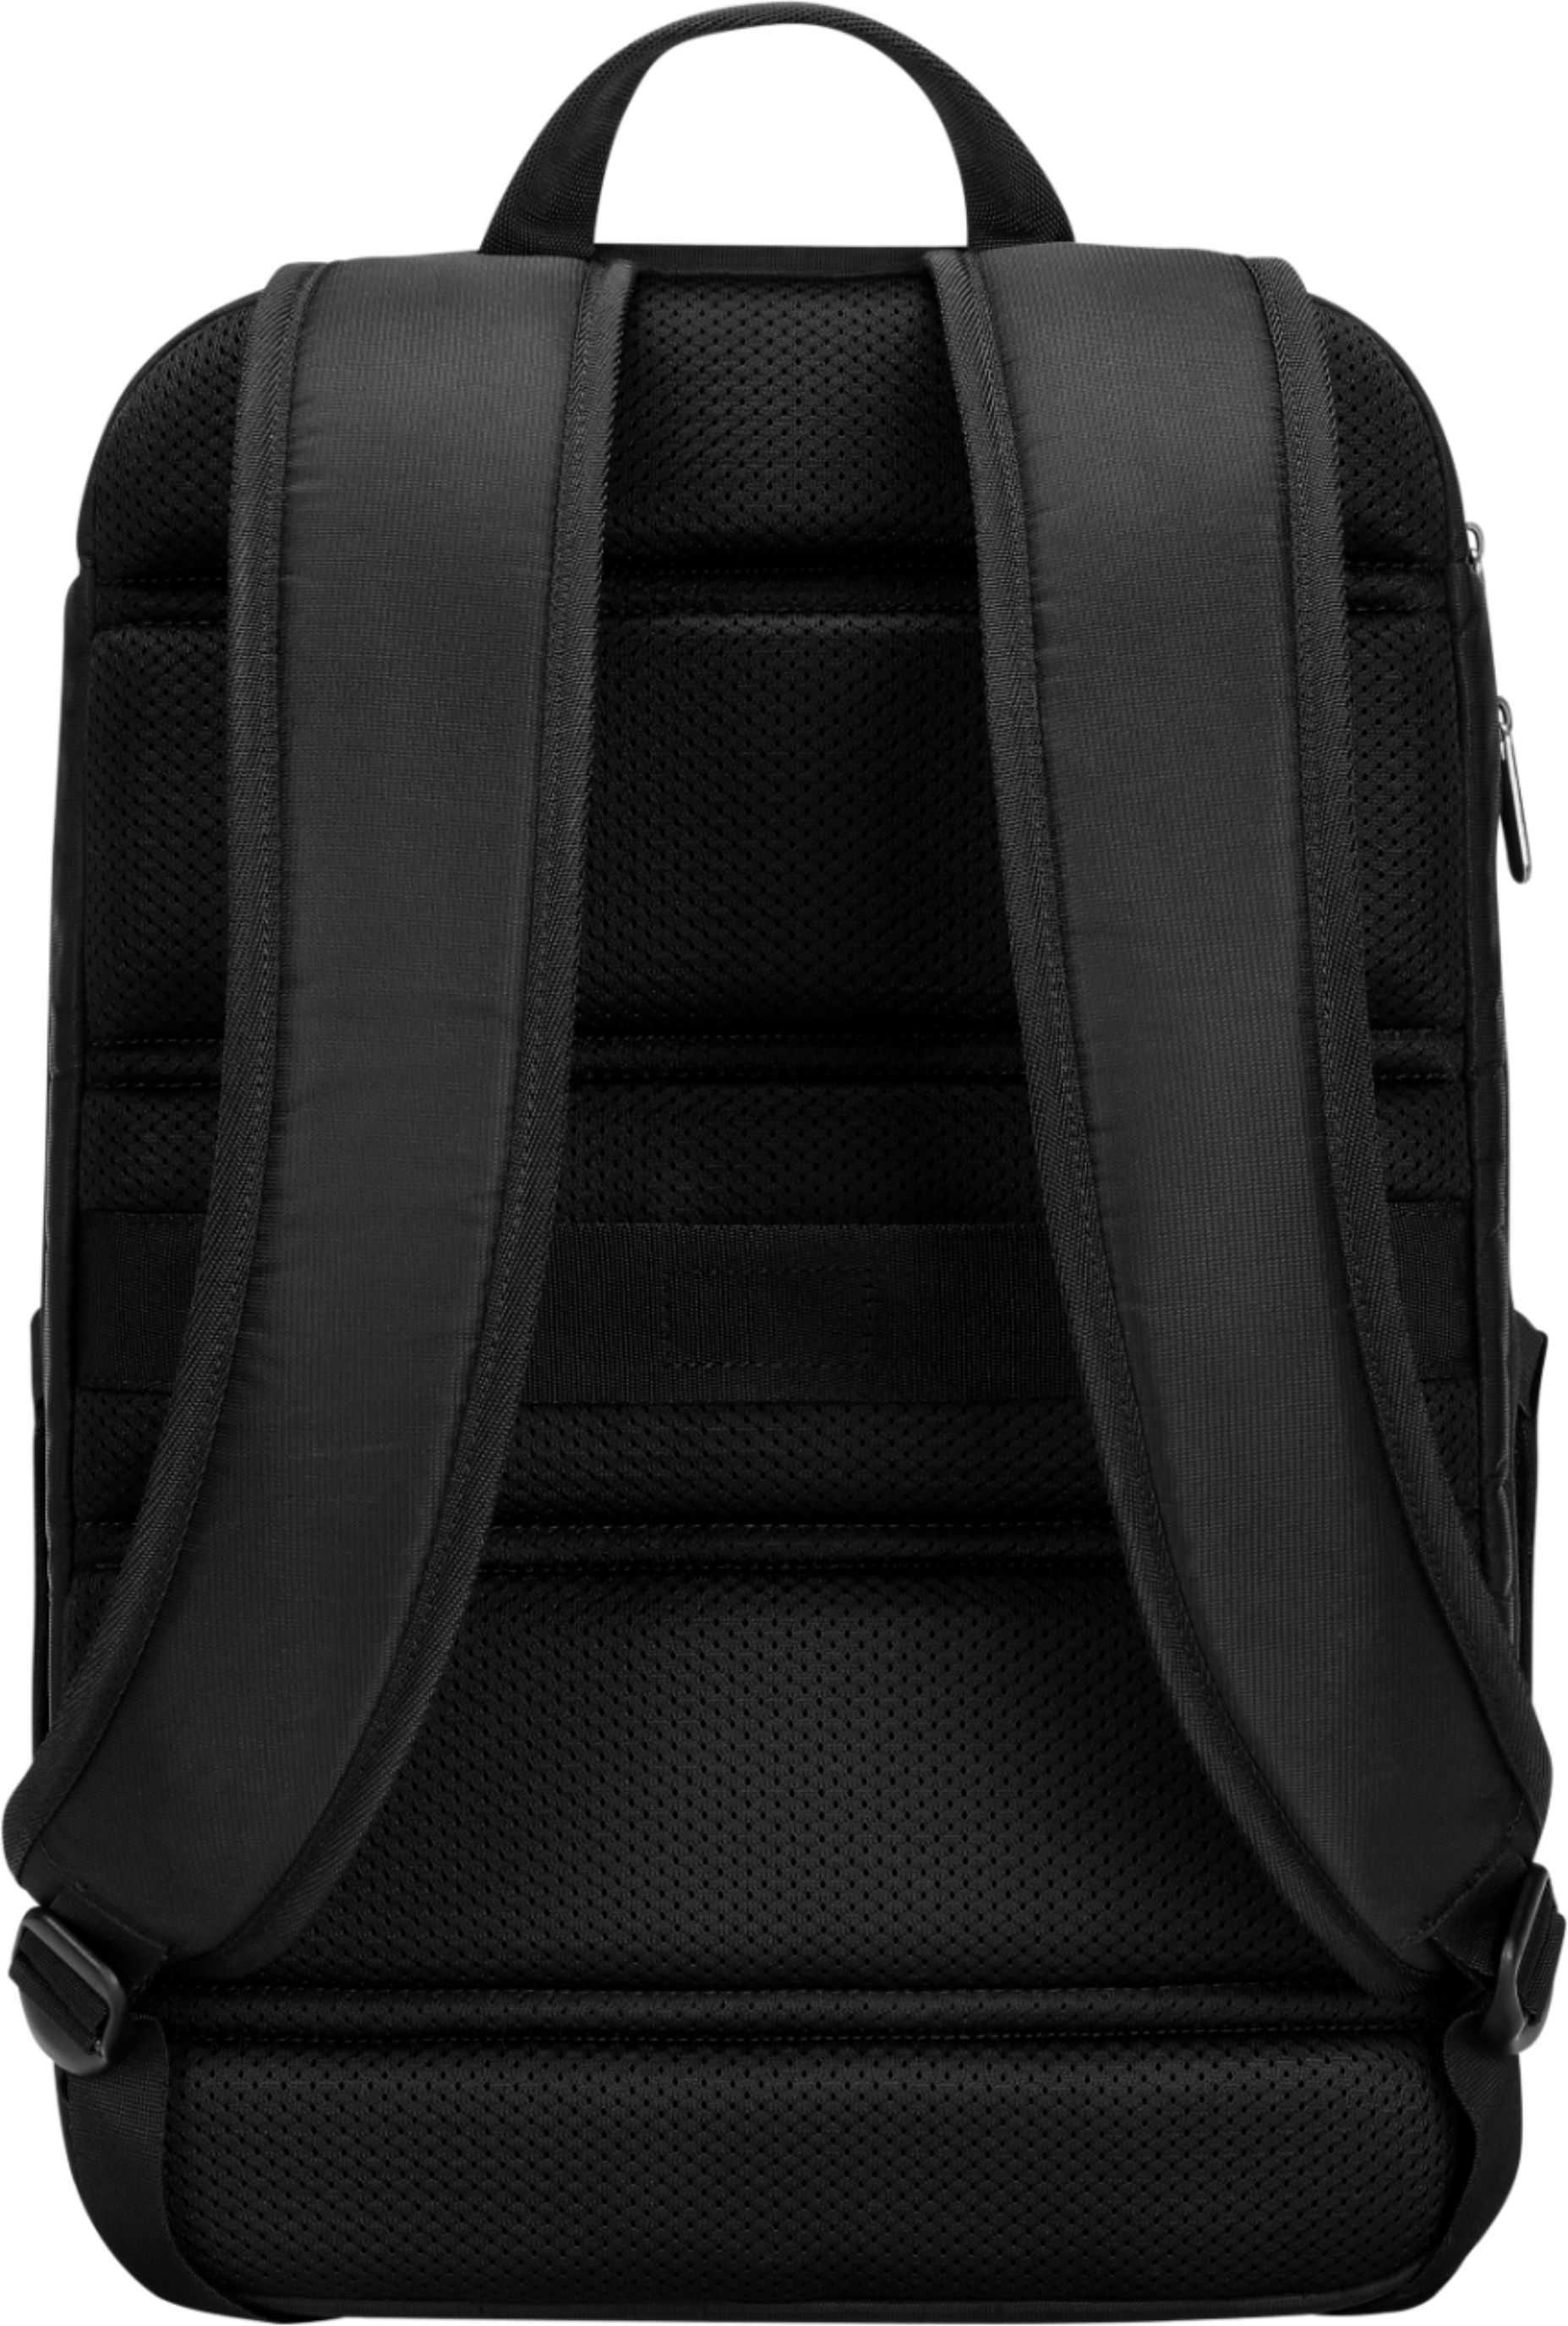 Angle View: Thule - Chronical 28L Backpack for 15.6" Laptop with 10.1" Tablet Sleeve, SafeZone Pocket, Water Bottle Holder, Padded Backpanel - Black